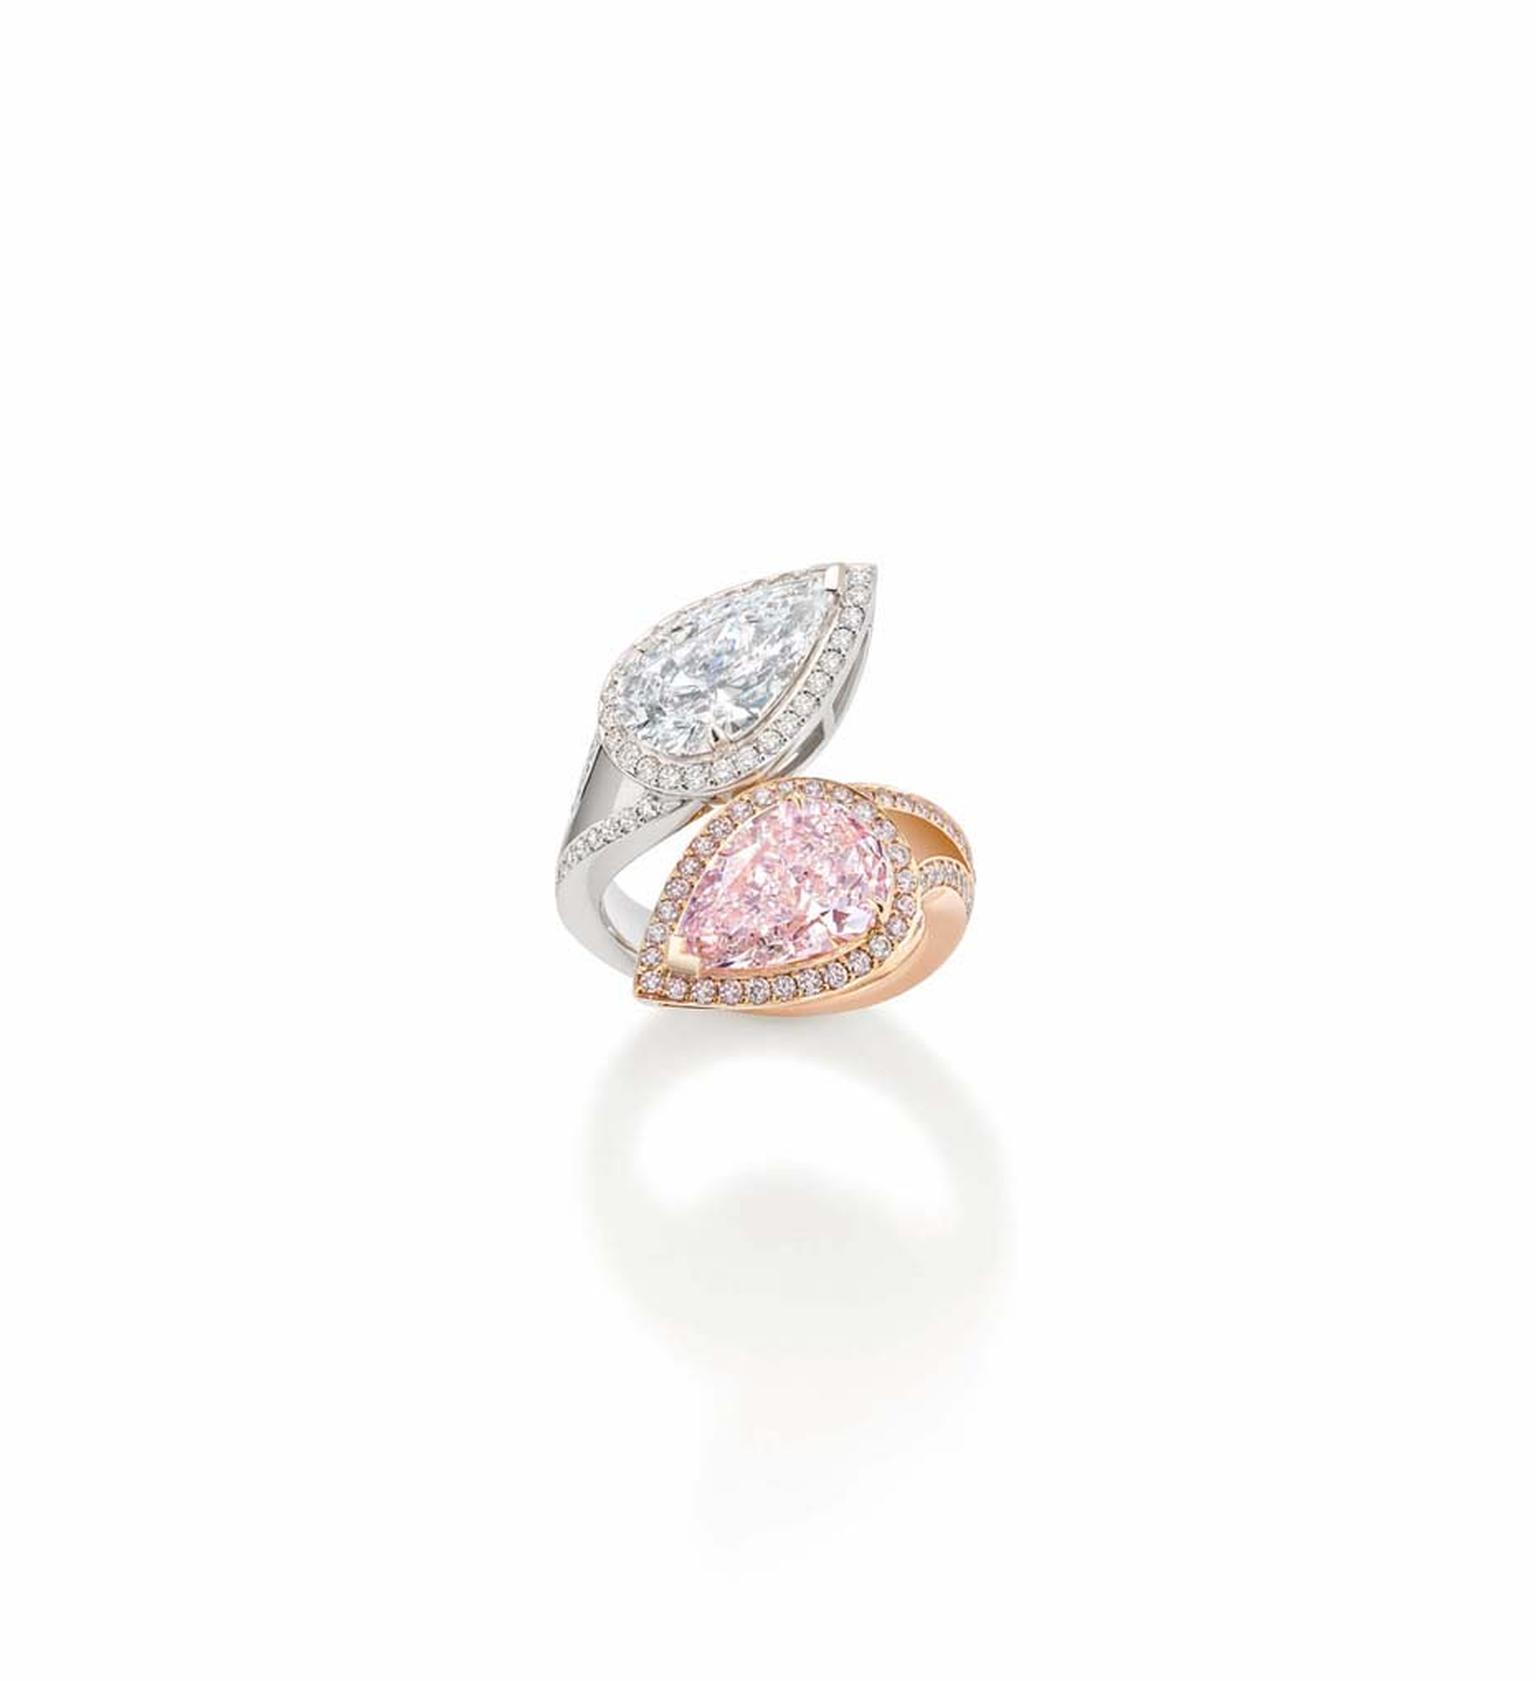 Boodles Gemini collection ring features a natural light pink, pear-shaped diamond on one prong, mirrored by a stunning D colour white diamond on the other.